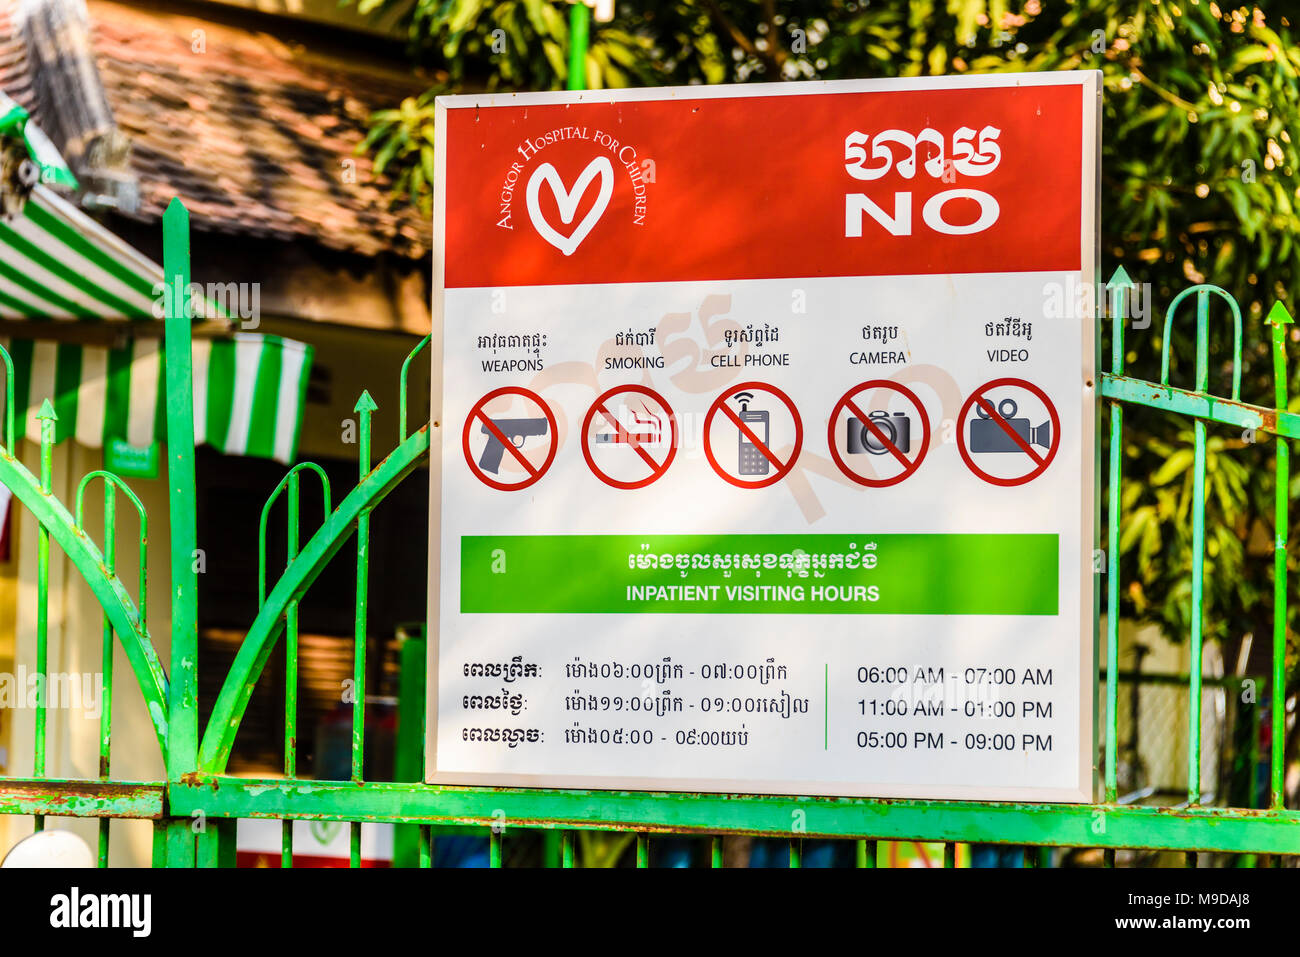 Sign at Siem Reap Children's Hospital, warning visitors of banned items and activities, Siem Reap, Cambodia Stock Photo